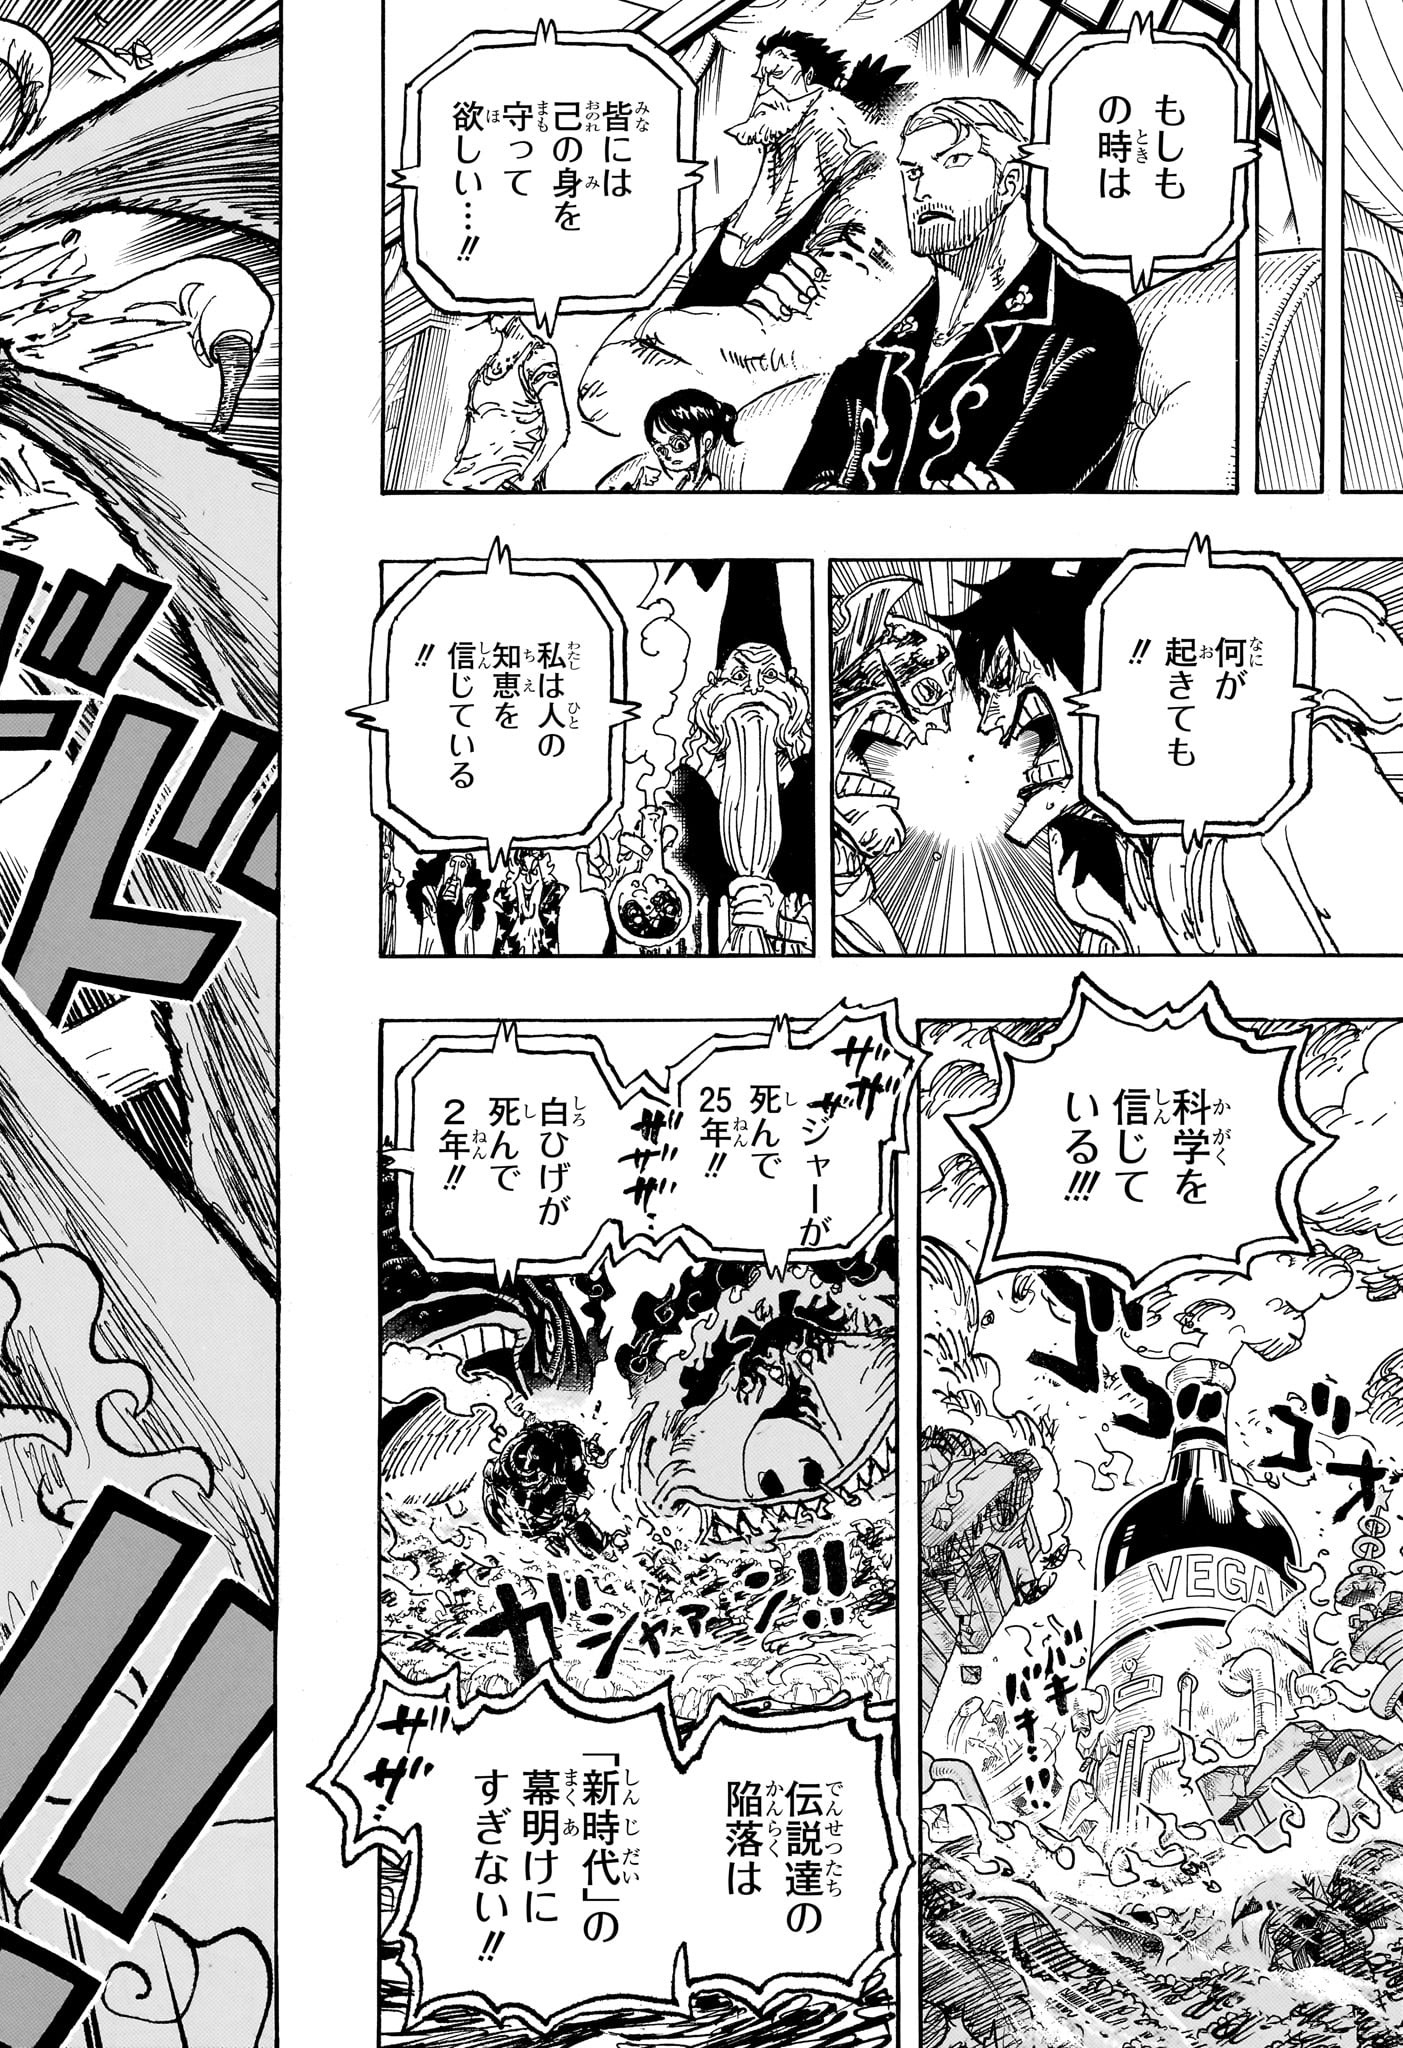 One Piece - Chapter 1121 - Page 11